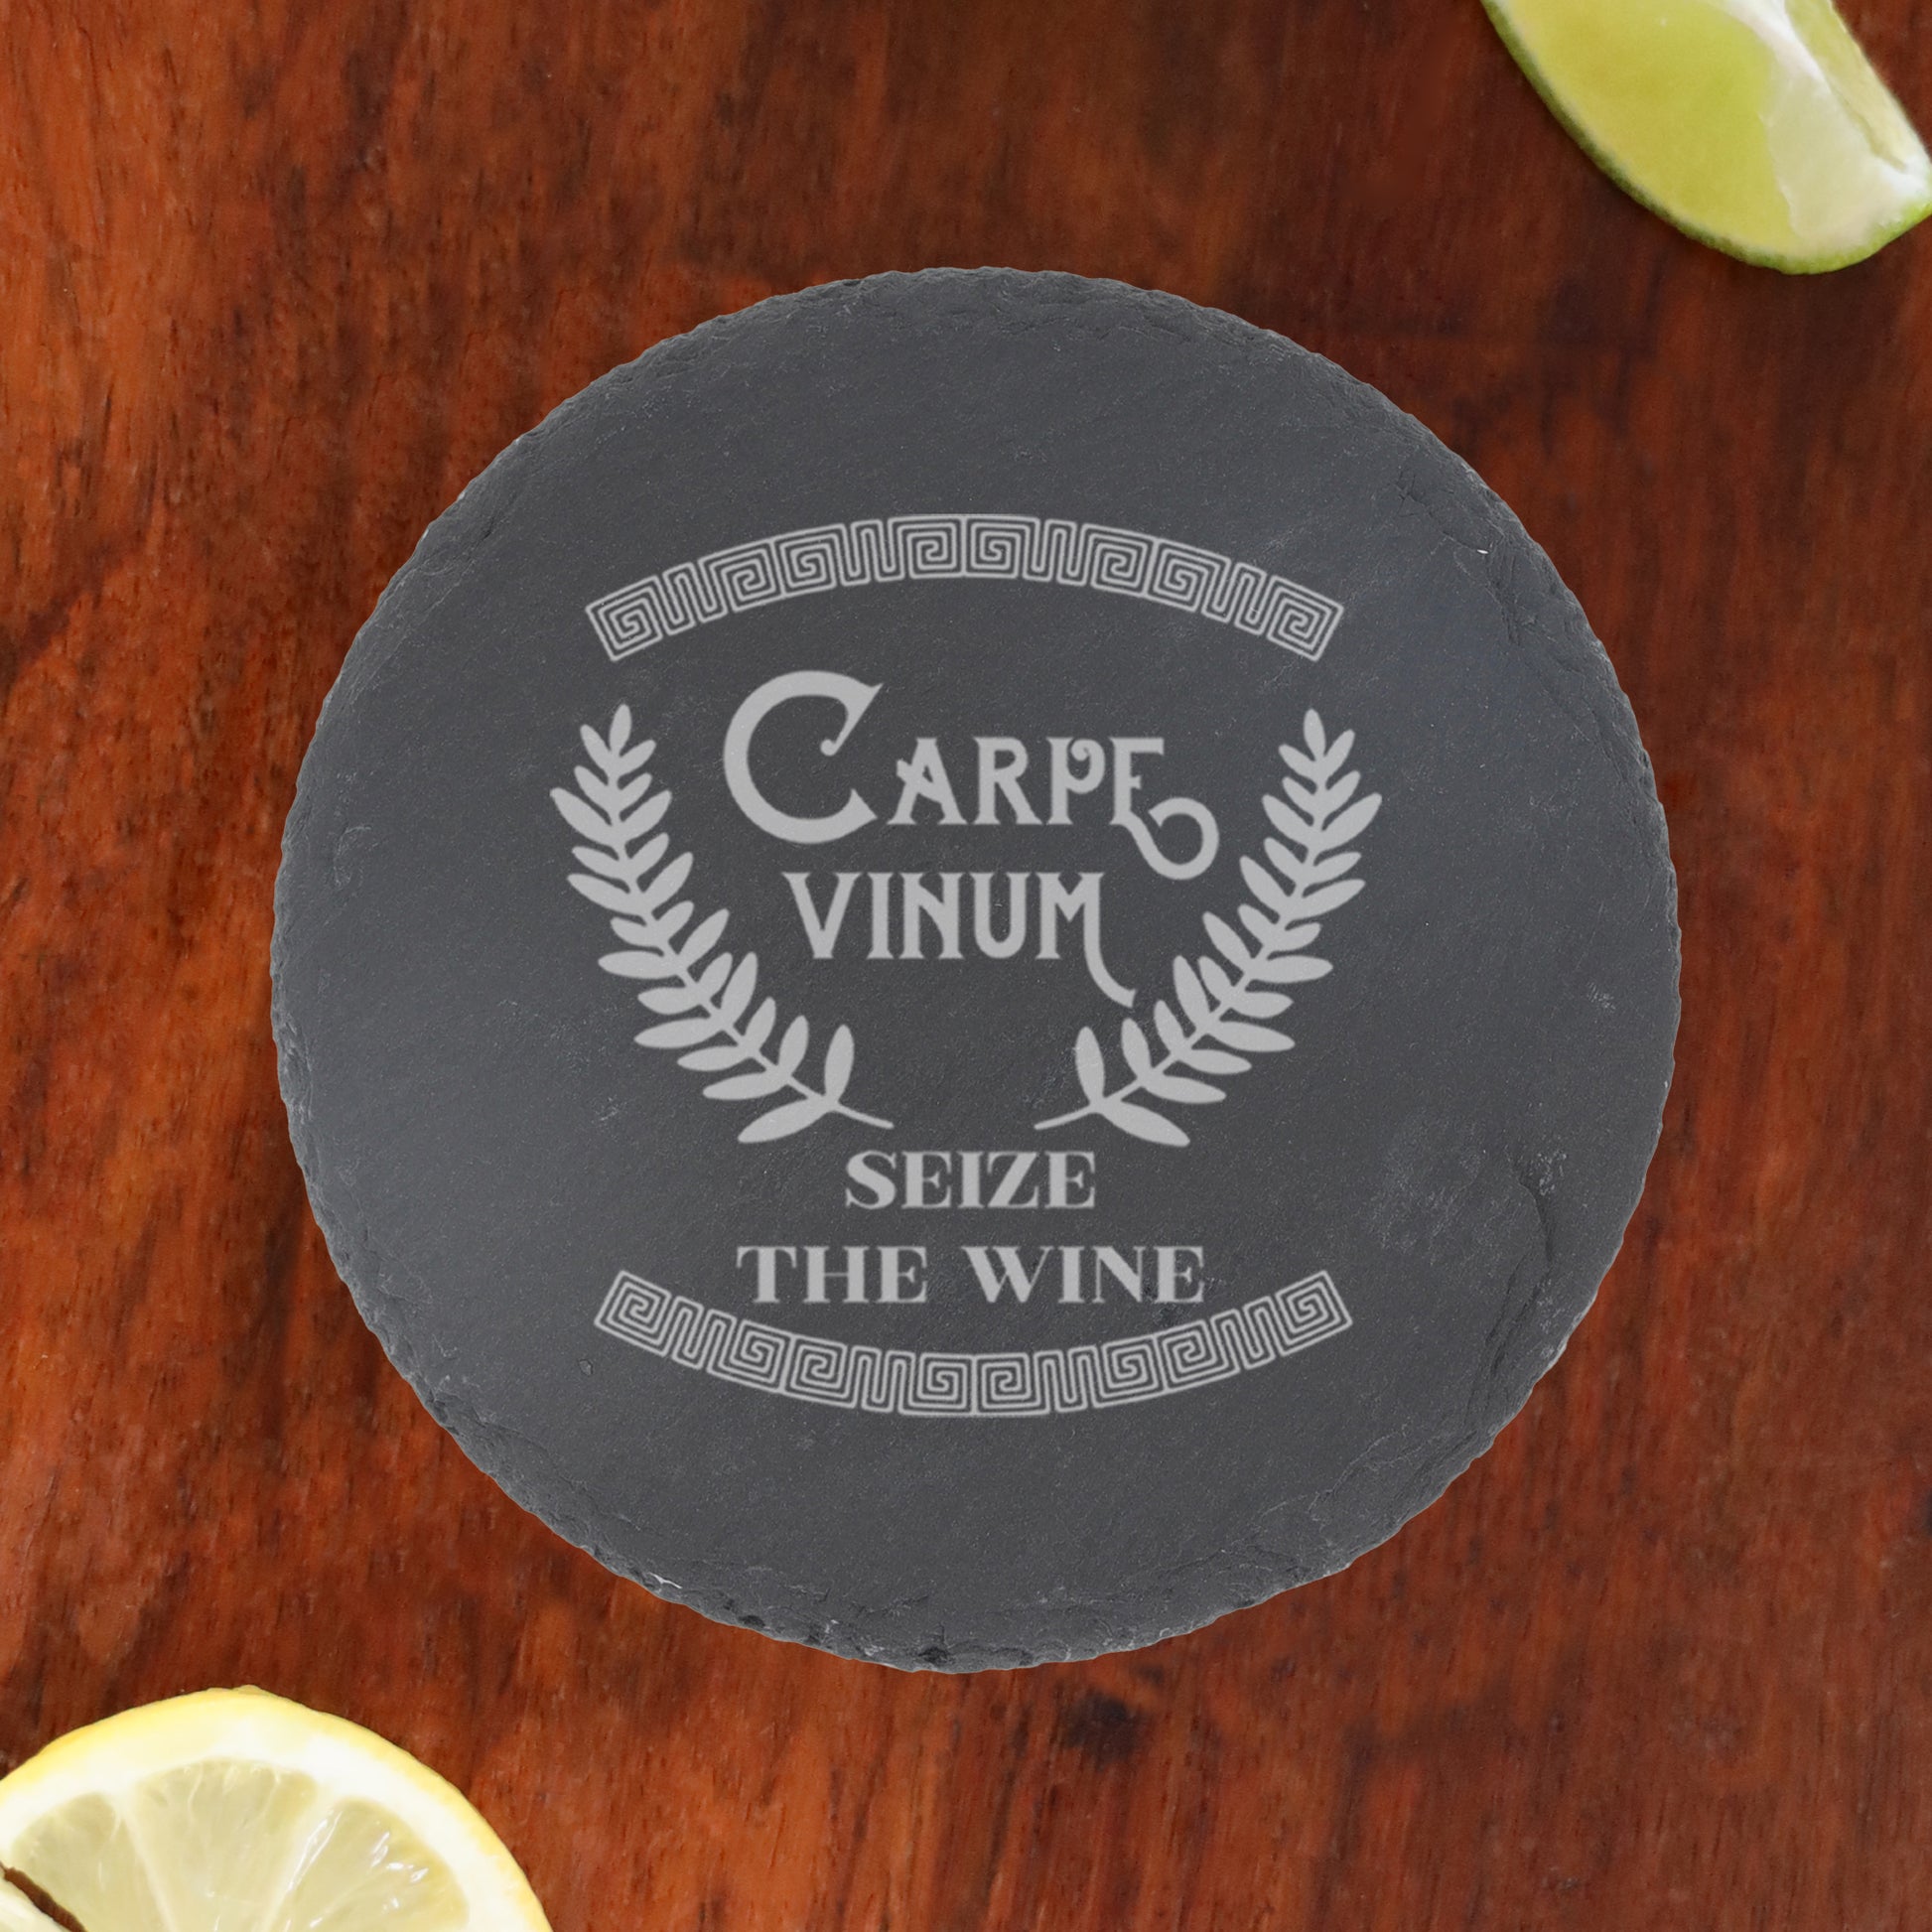 Funny Engraved "Carpe Vinum Seize The Wine" Novelty Wine Glass and/or Coaster Set  - Always Looking Good - Round Coaster Only  